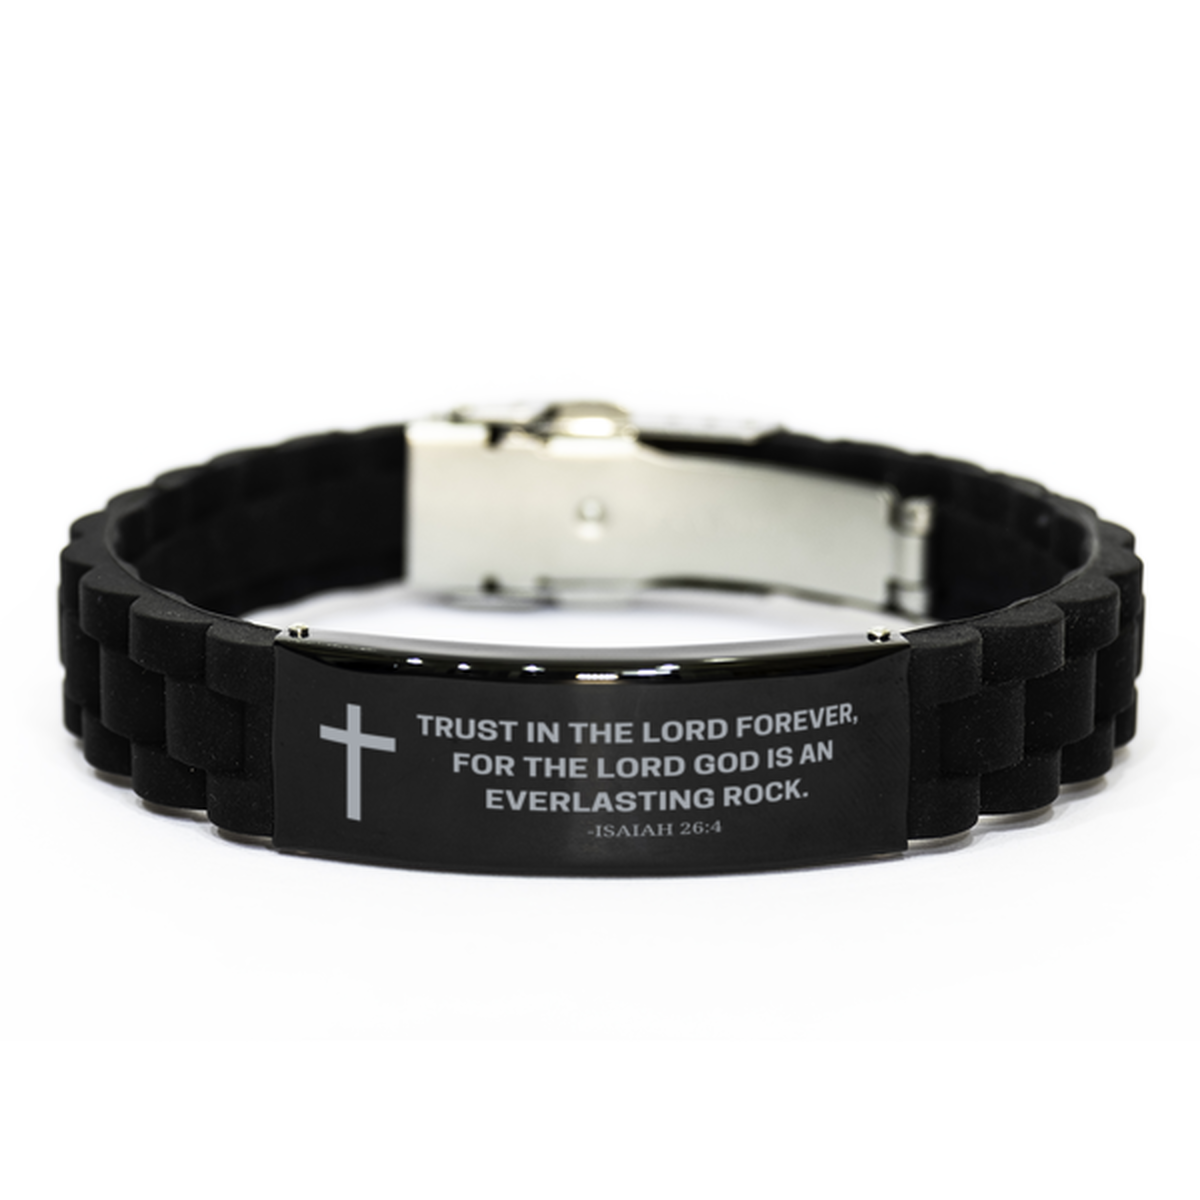 Baptism Gifts For Teenage Boys Girls, Christian Bible Verse Black Glidelock Clasp Bracelet, Trust in the Lord forever, Catholic Confirmation Gifts for Son, Godson, Grandson, Nephew